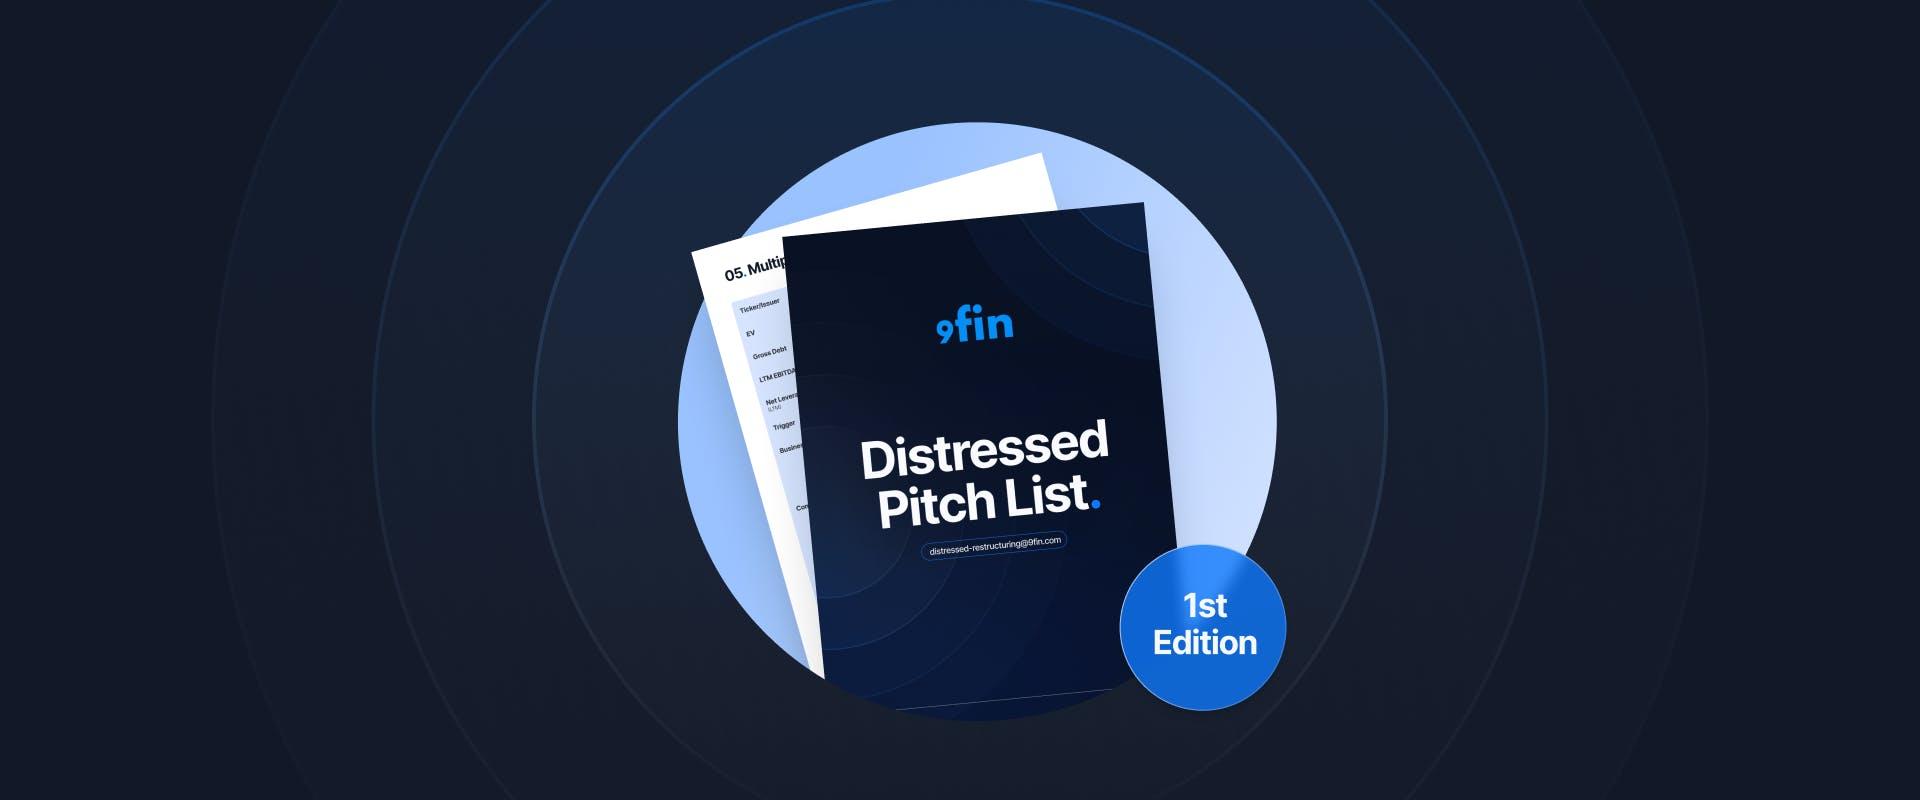 Distressed Pitch list — First Edition